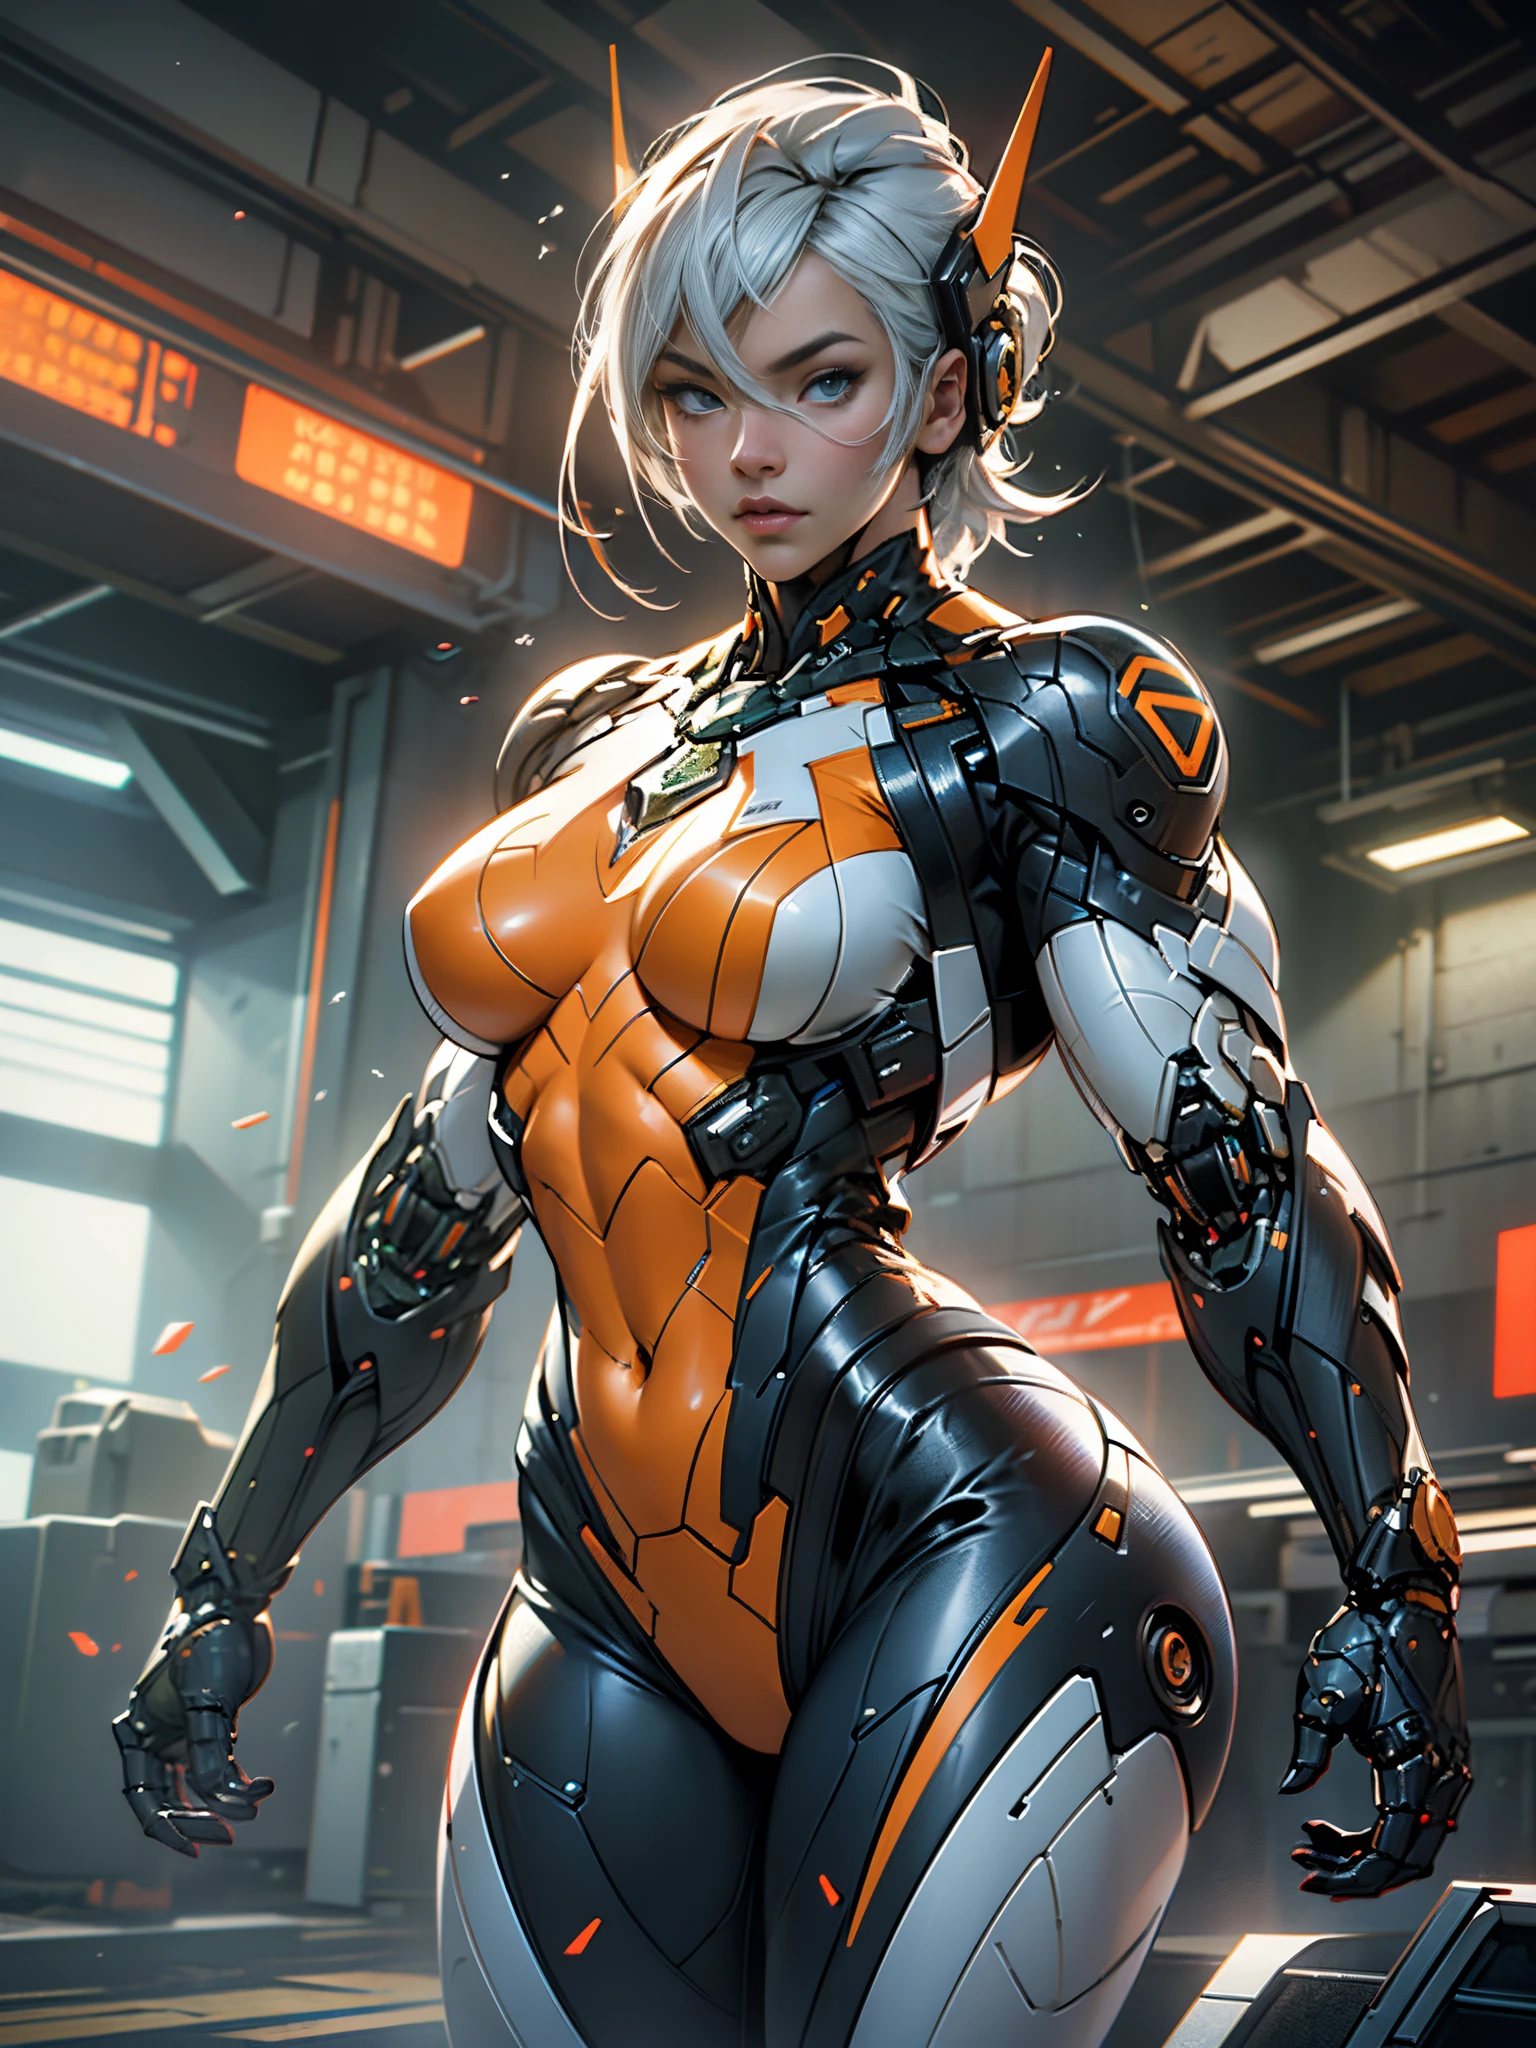 Cinematic, hyper-detailed, and insanely detailed, this artwork captures the essence of a bald hairless muscular female android girl. Beautiful color grading, enhancing the overall cinematic feel. Unreal Engine brings her anatomic cybernetic muscle suit to life, appearing even more mesmerizing. With the use of depth of field (DOF), every detail is focused and accentuated, drawing attention to her eyes and the intricate design of the anatomic cybernetic muscle suit . The image resolution is at its peak, utilizing super-resolution technology to ensure every pixel is perfect. Cinematic lighting enhances her aura, while anti-aliasing techniques like FXAA and TXAA keep the edges smooth and clean. Adding realism to the anatomic cybernetic muscle suit, RTX technology enables ray tracing. Additionally, SSAO (Screen Space Ambient Occlusion) gives depth and realism to the scene, the girl's anatomic cybernetic muscle suit become even more convincing. In the post-processing and post-production stages, tone mapping enhances the colors, creating a captivating visual experience. The integration of CGI (Computer-Generated Imagery) and VFX (Visual Effect brings out the anatomic cybernetic muscle suit's intricate features in a seamless manner. SFX (Sound Effects) complement the visual artistry, immersing the viewer further into this fantastic world. The level of detail is awe-inspiring, with intricate elements meticulously crafted, the artwork hyper maximalist and hyper-realistic. Volumetric effects add depth and dimension, and the photorealism is unparalleled. The image is rendered in 8K resolution, ensuring super-detailed visuals. The volumetric lightning adds a touch of magic, highlighting her beauty and the aura of her anatomic cybernetic muscle suit in an otherworldly way. High Dynamic Range (HDR) technology makes the colors pop, adding richness to the overall composition. Ultimately, this artwork presents an unreal portrayal of a super muscled cybernetic female android